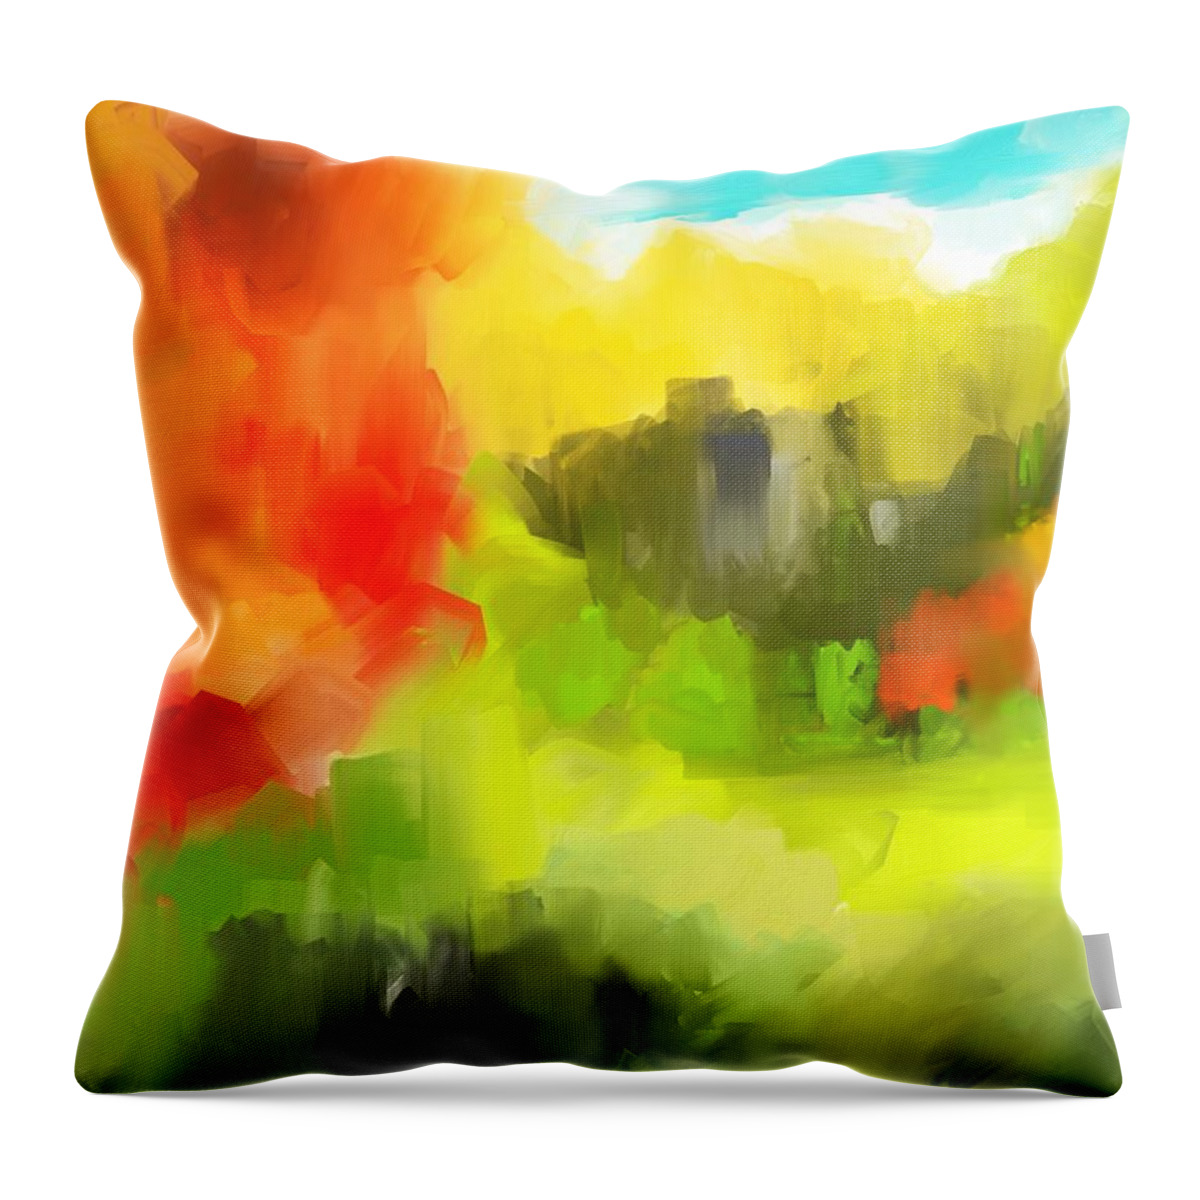 Abstract Throw Pillow featuring the digital art Abstract 112210 by David Lane